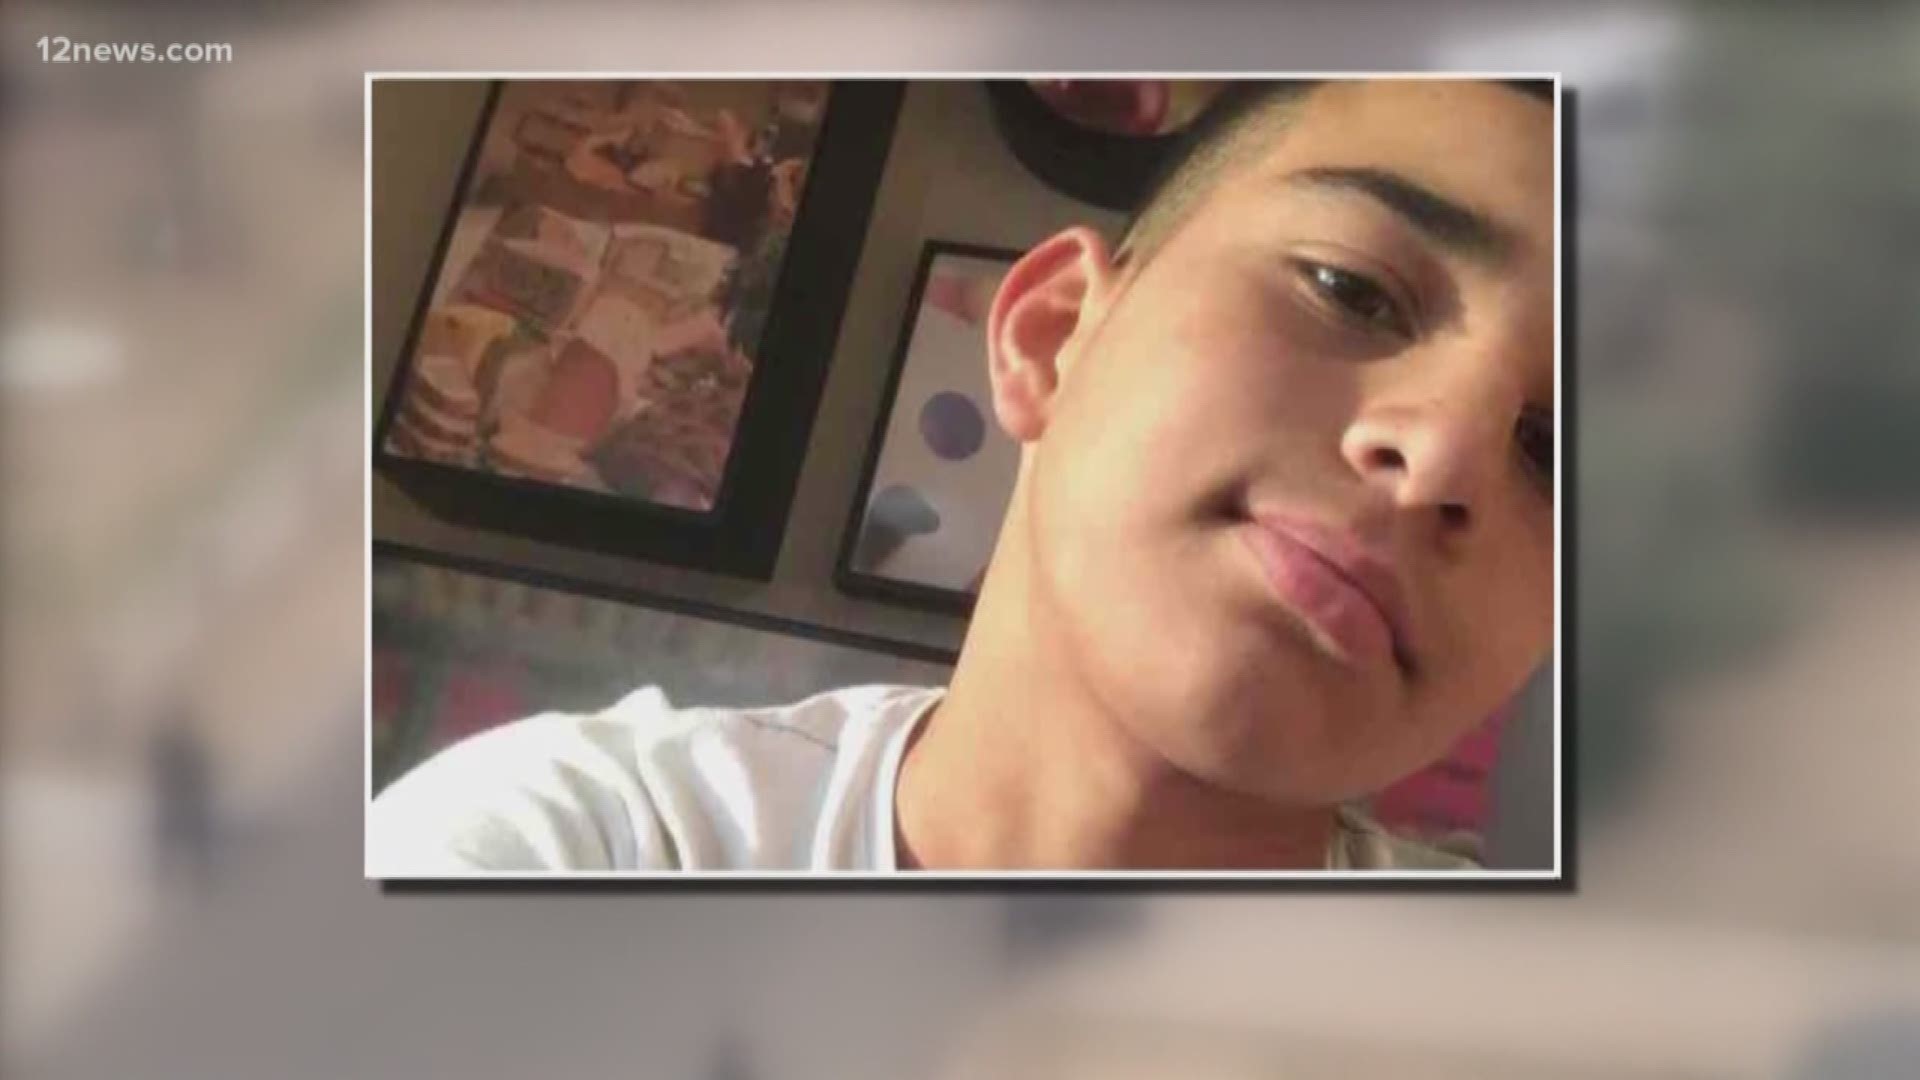 For the first time since the Tempe Police Department showed new video of an officer fatally shooting 14-year-old burglary suspect, Antonio Arce, we are hearing the family's reaction to the video.